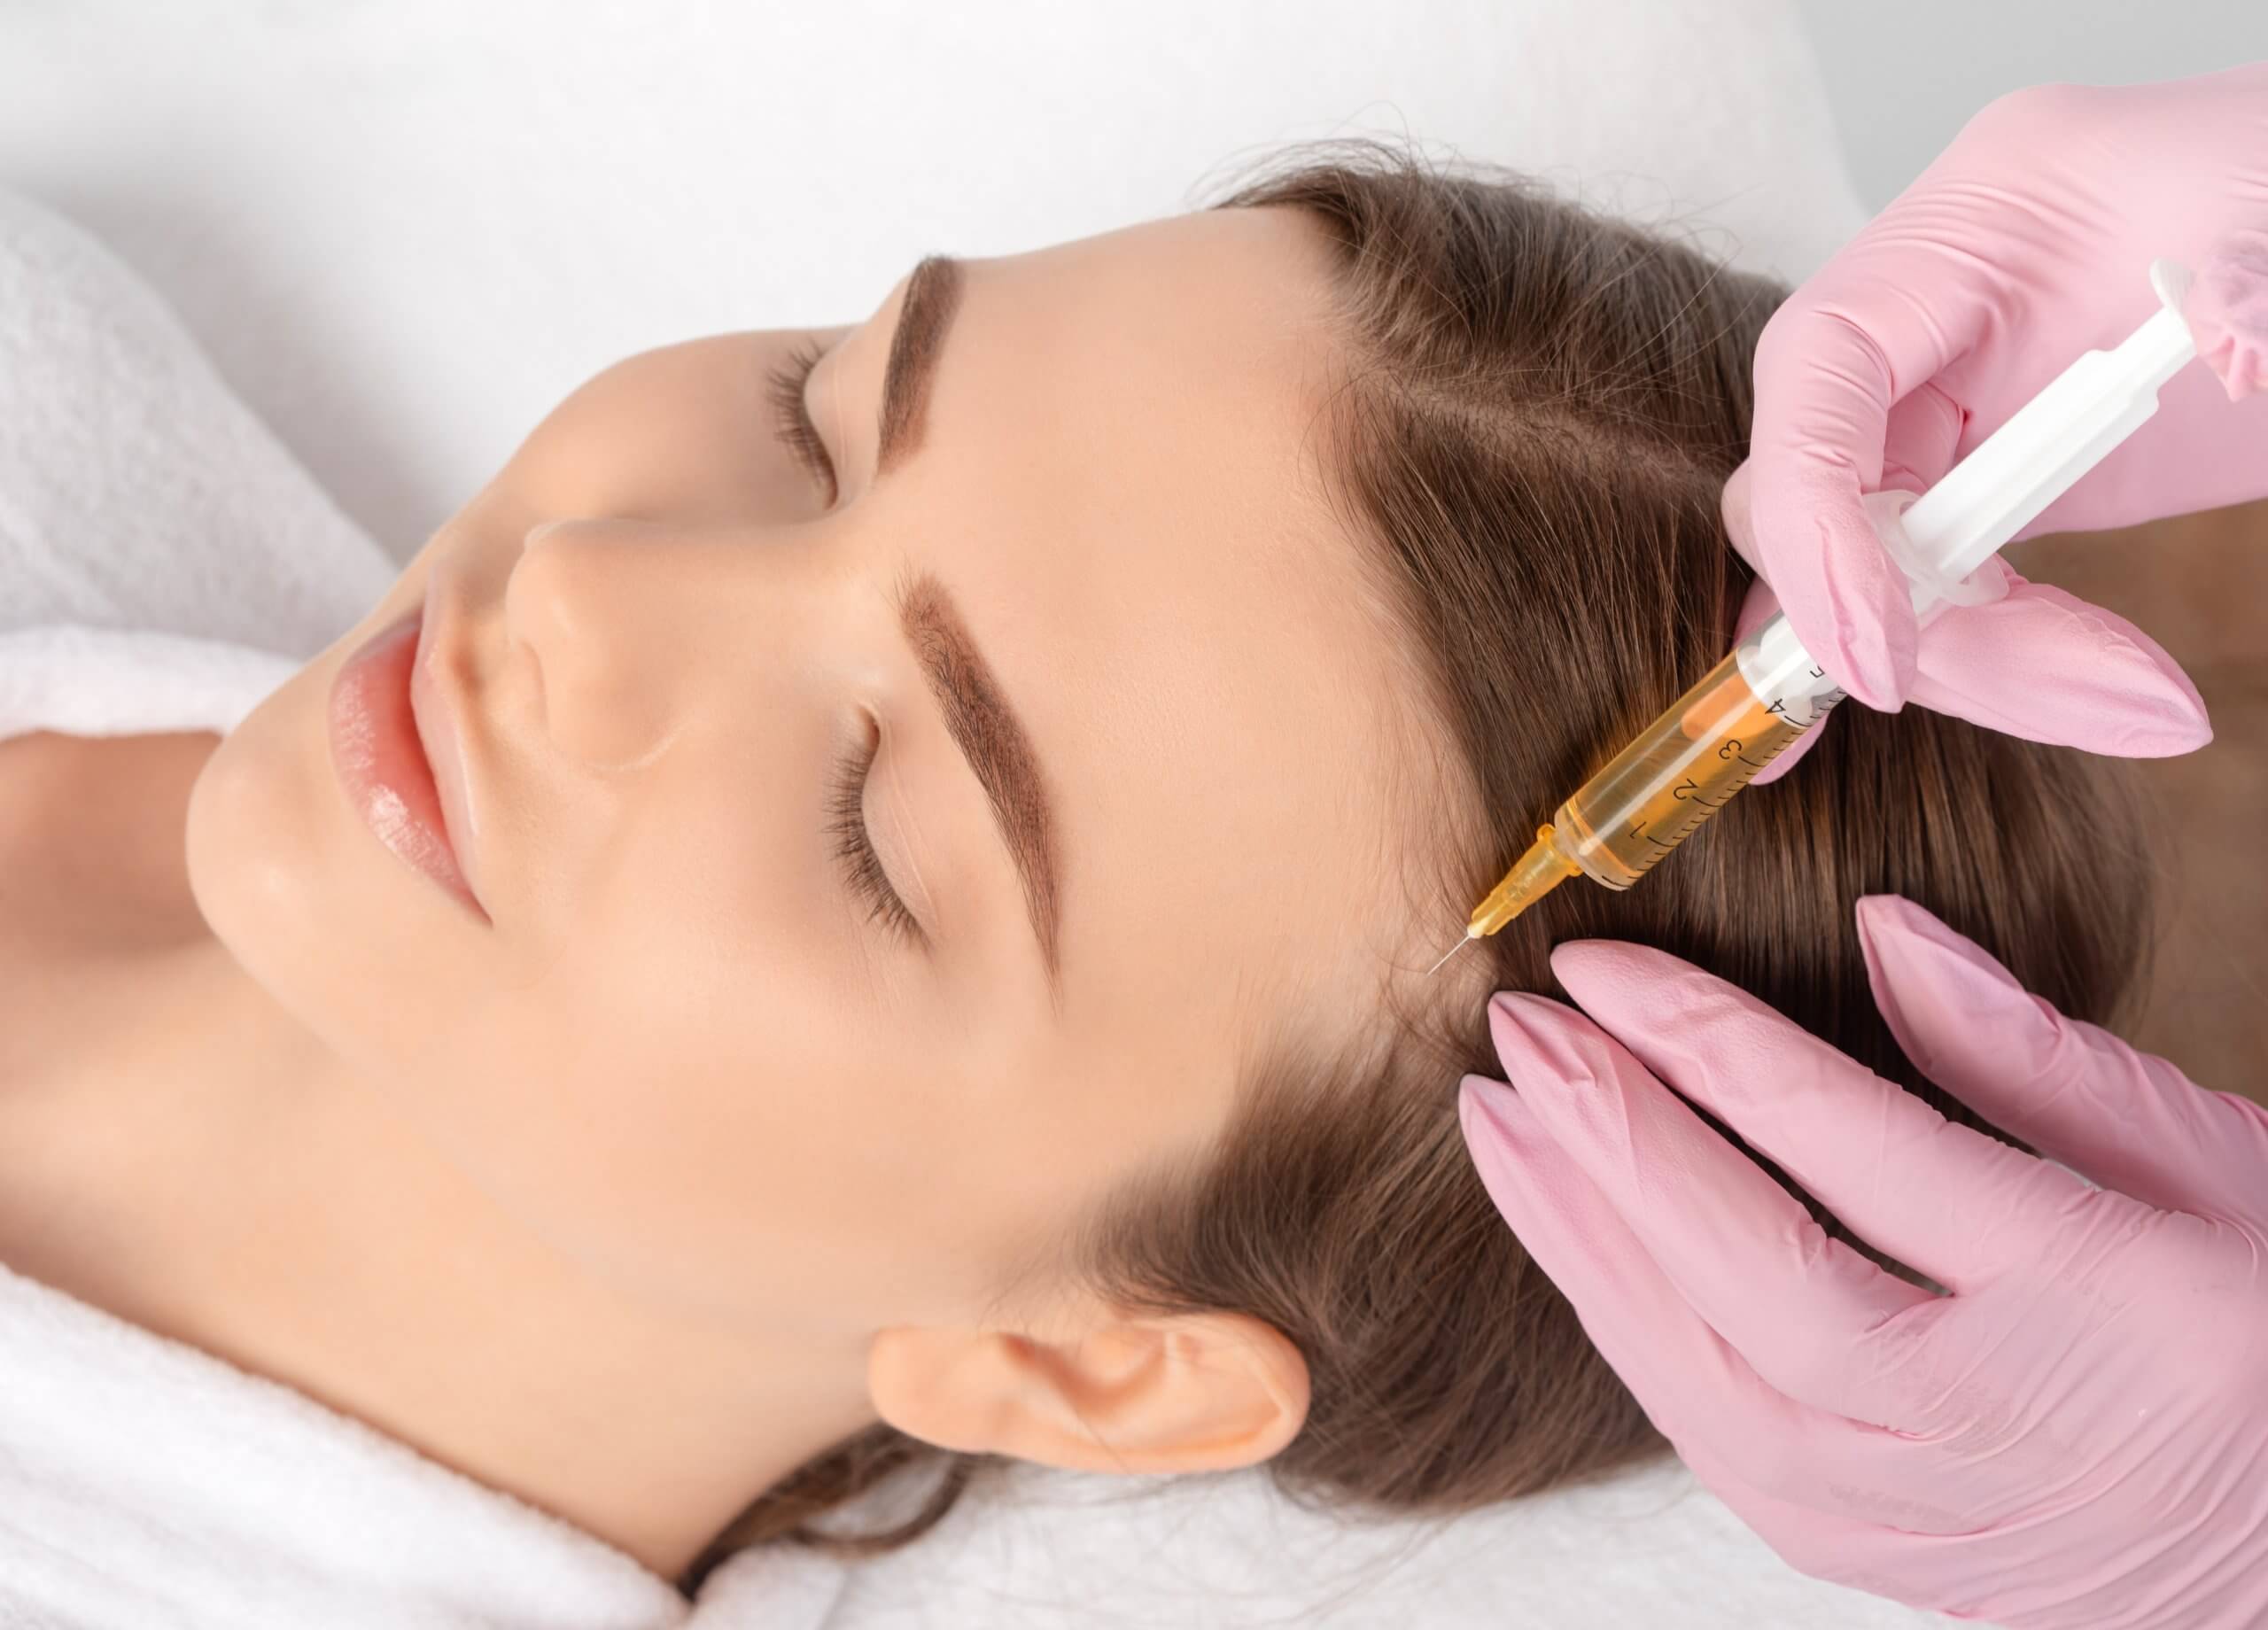 cosmetic injector learns PRF injections as a medical aesthetic training treatment